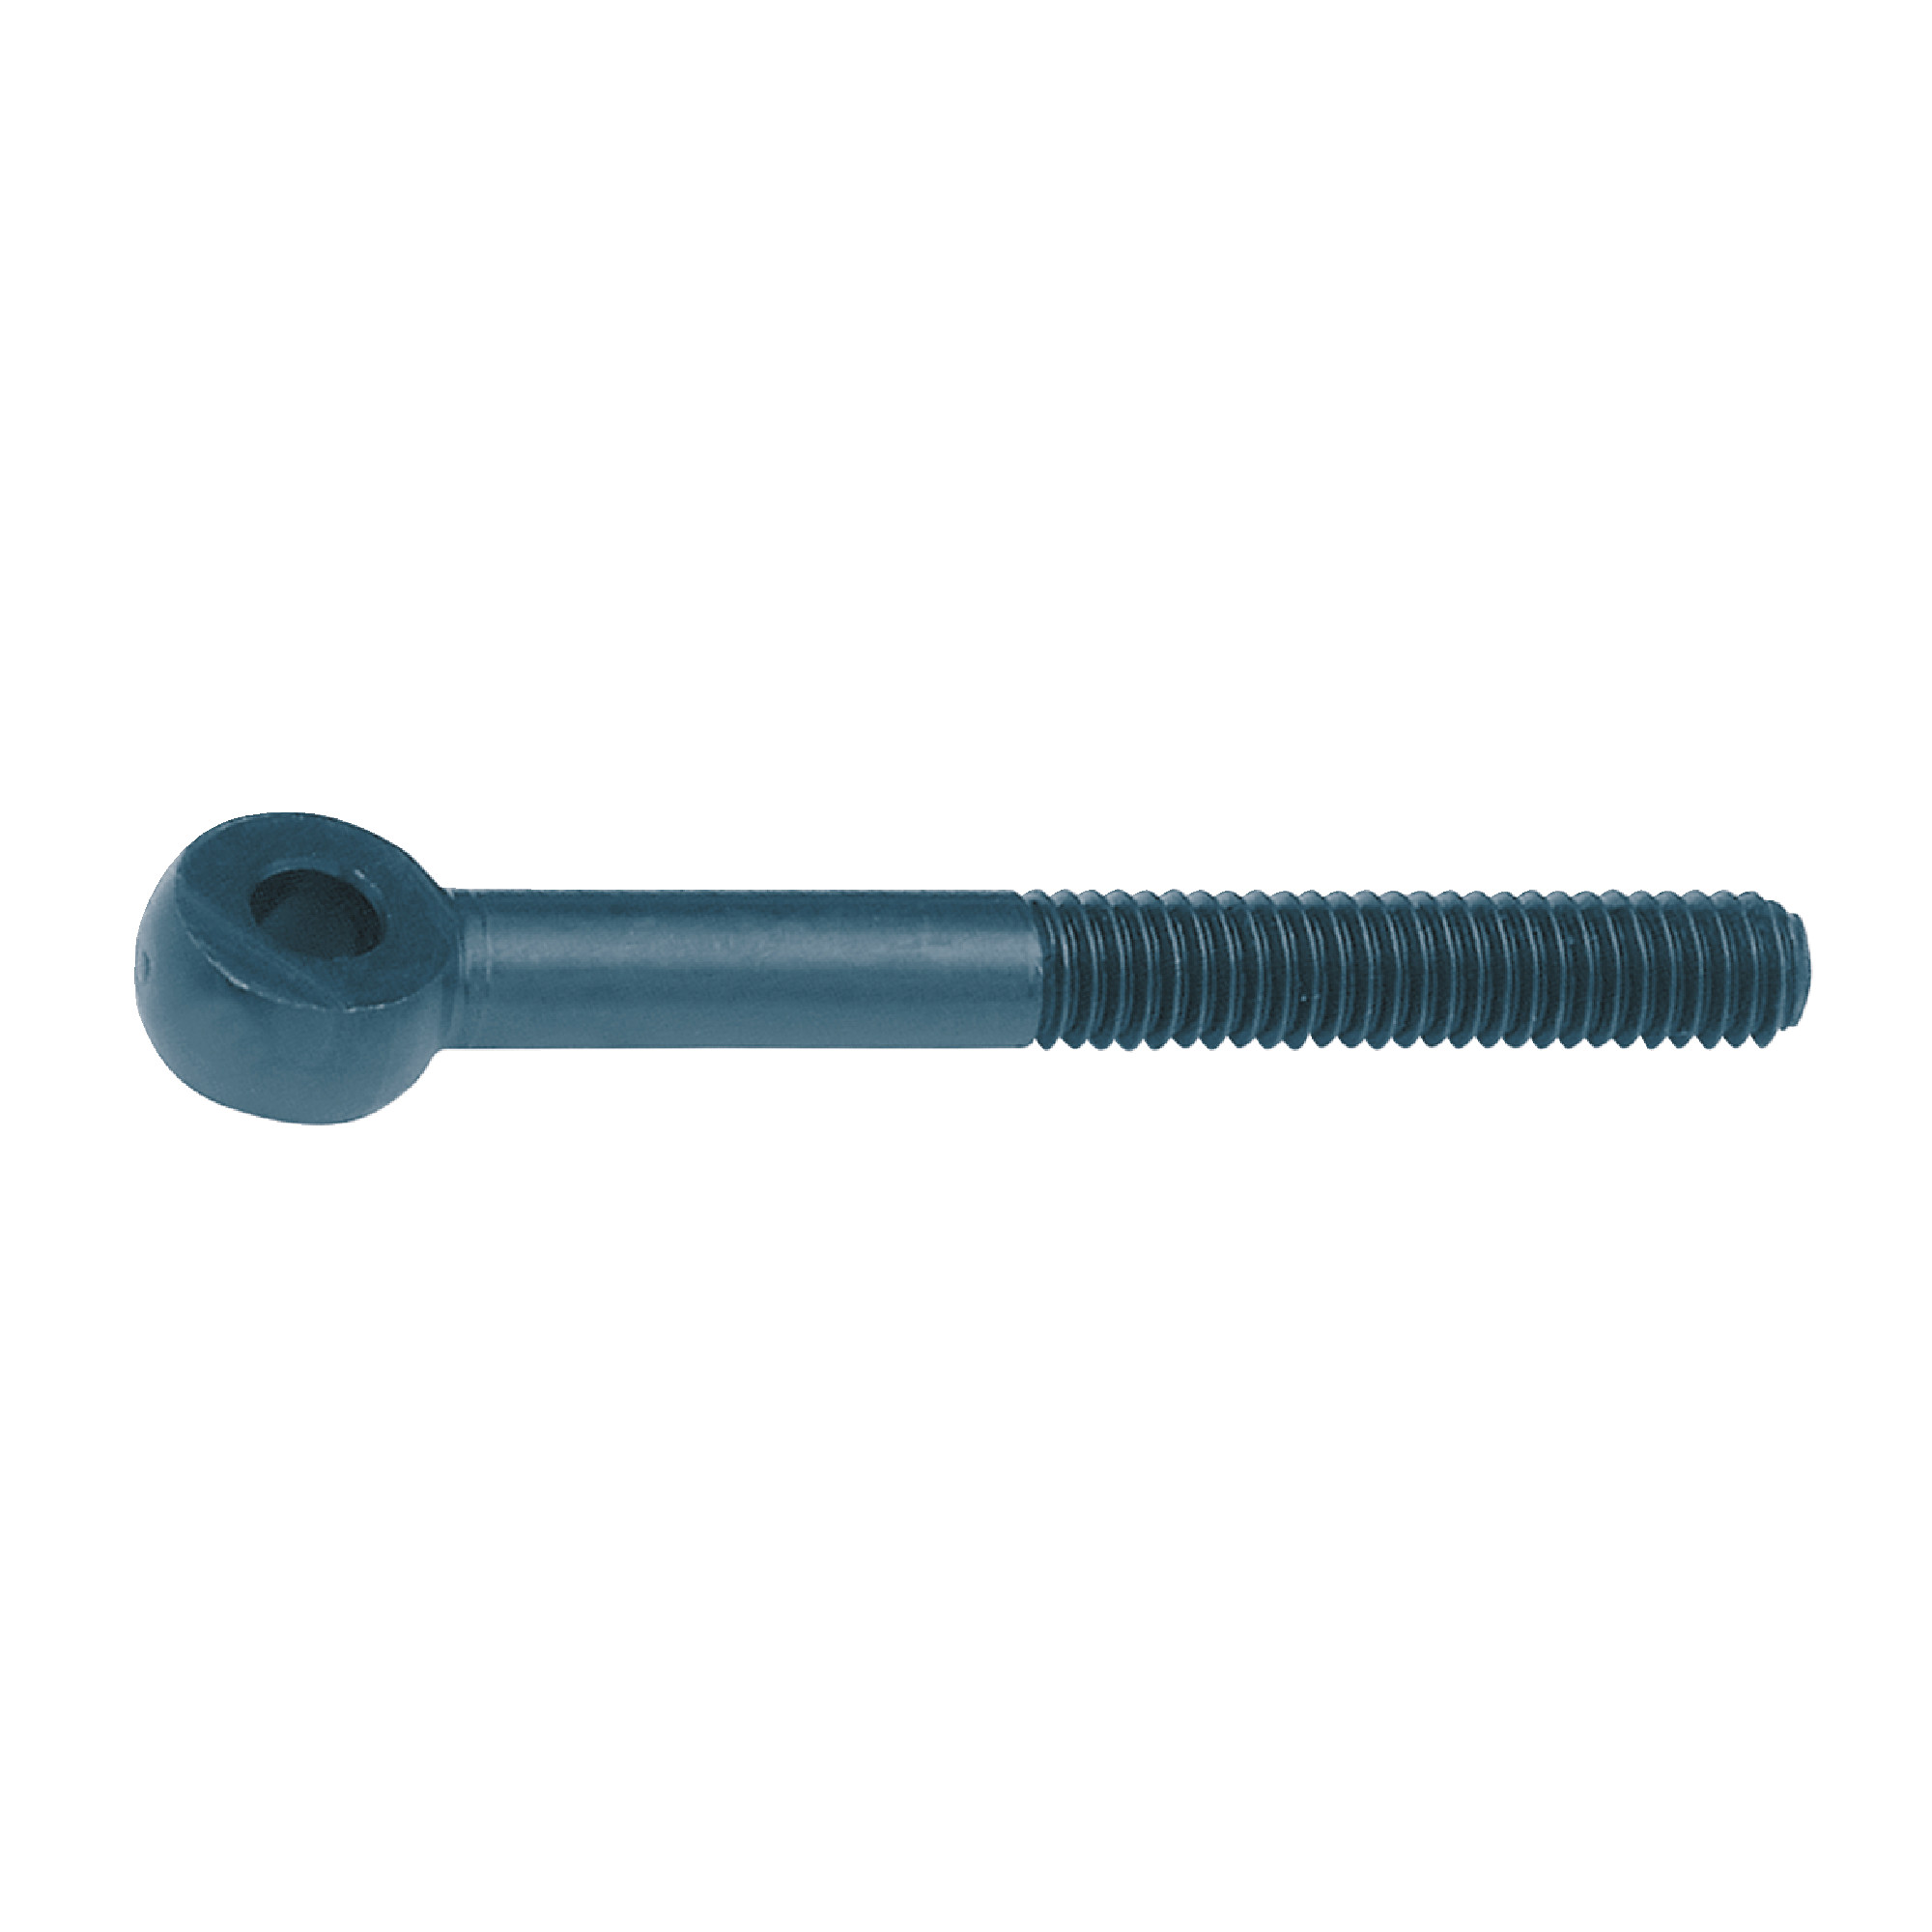 Steel Eye Bolt with Shoulder - Not For Lifting